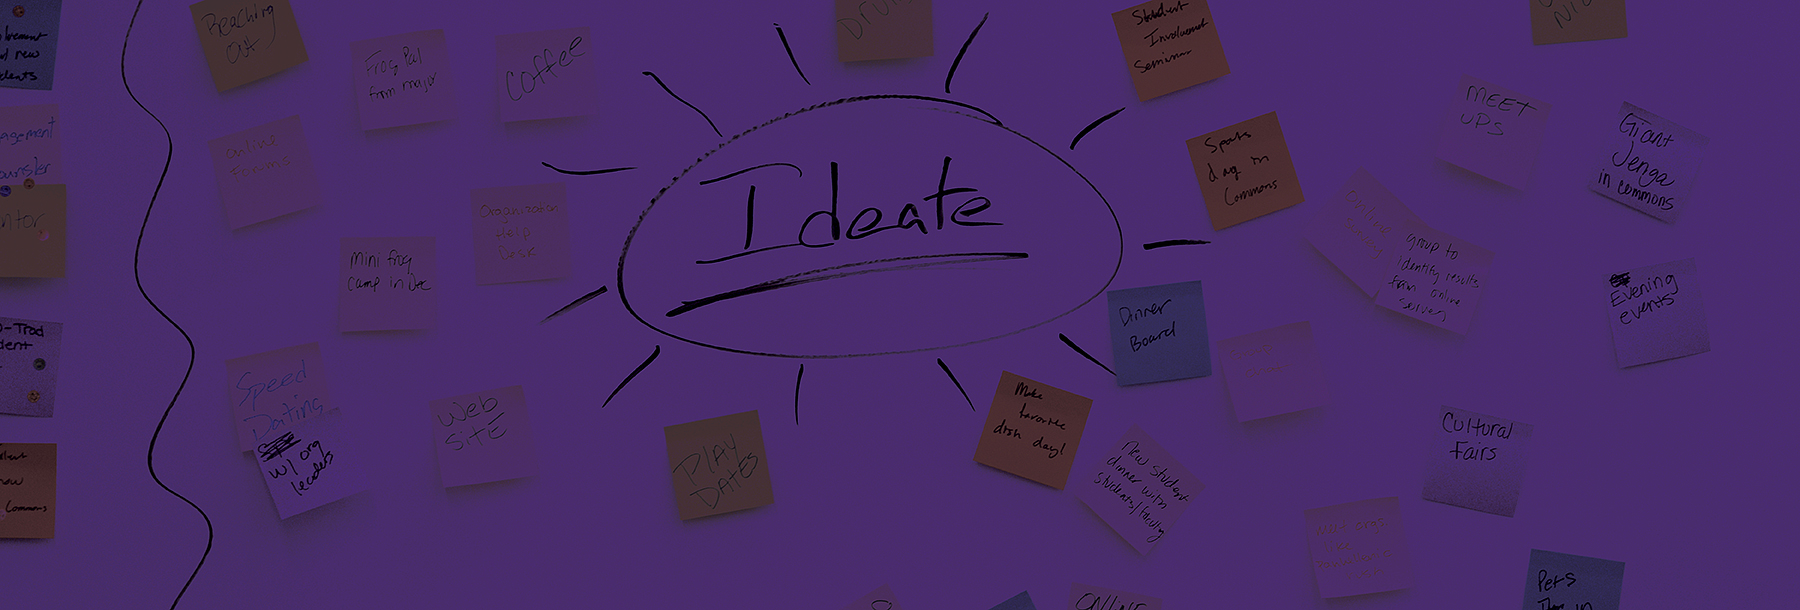 Section Image: Ideate Word Web 